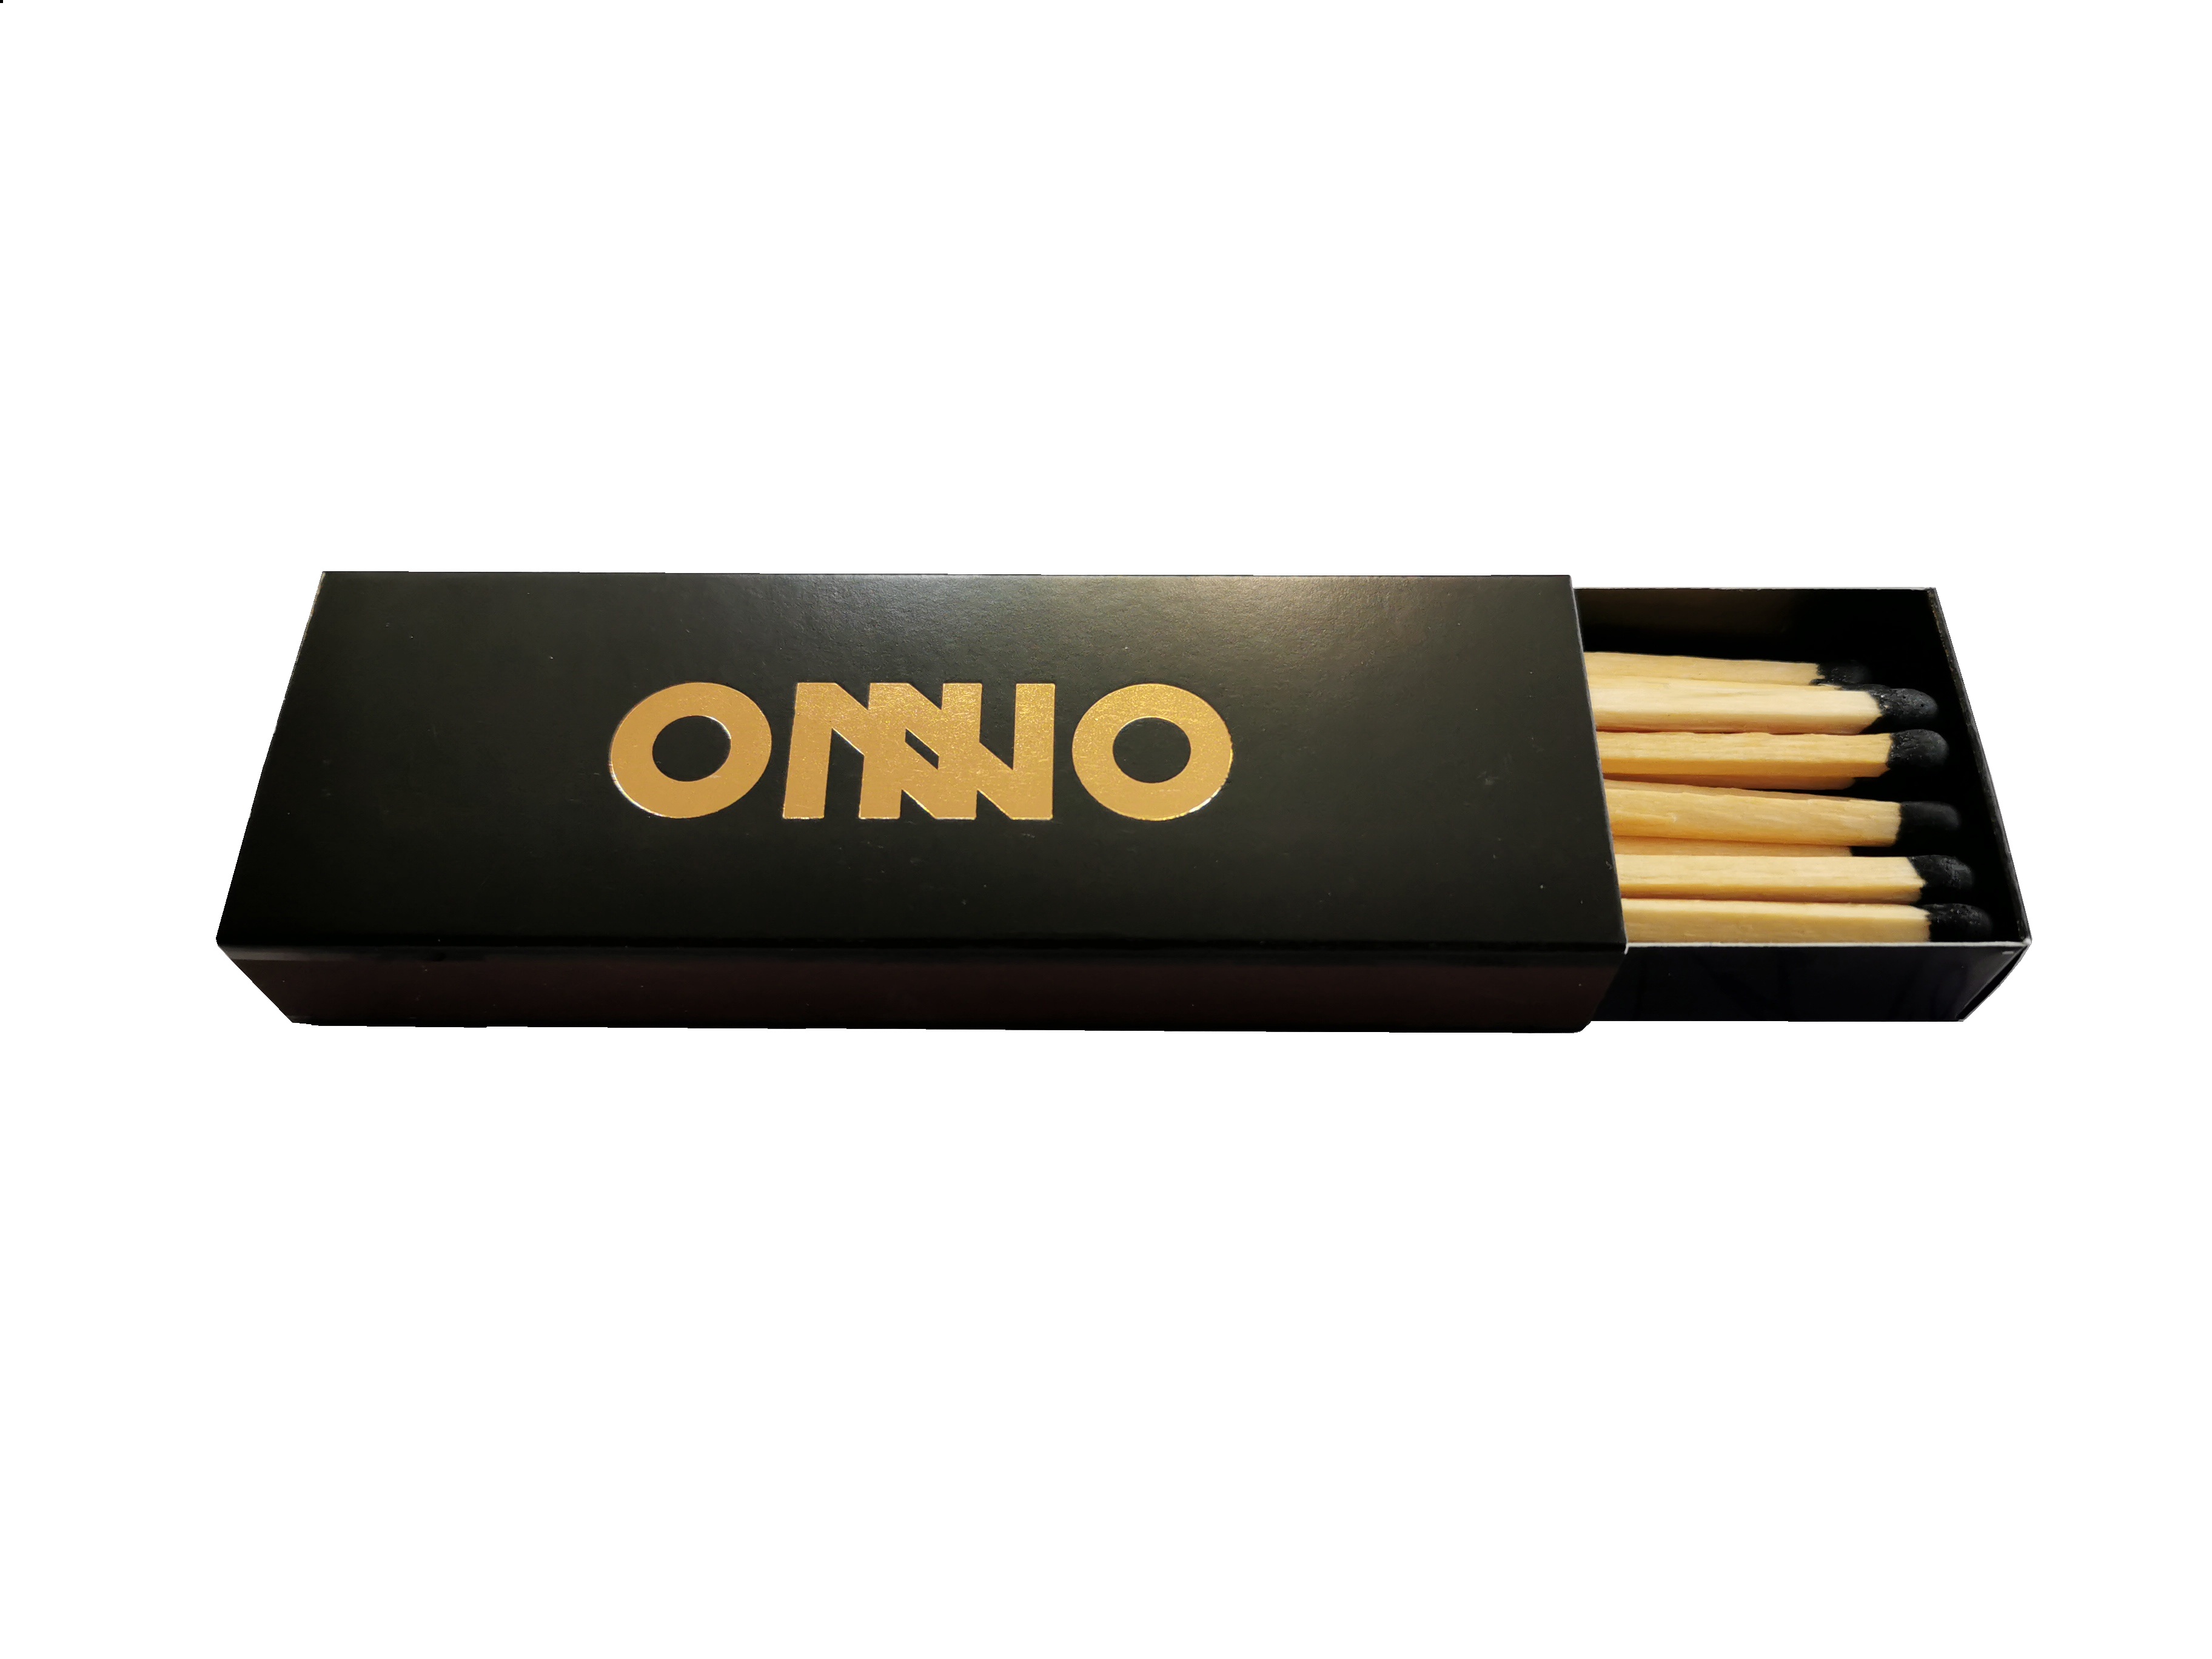 Match box  ***99x36x14mm or 105x36x14*** Content approx. 21 longsticks ***90mm or 100mm***